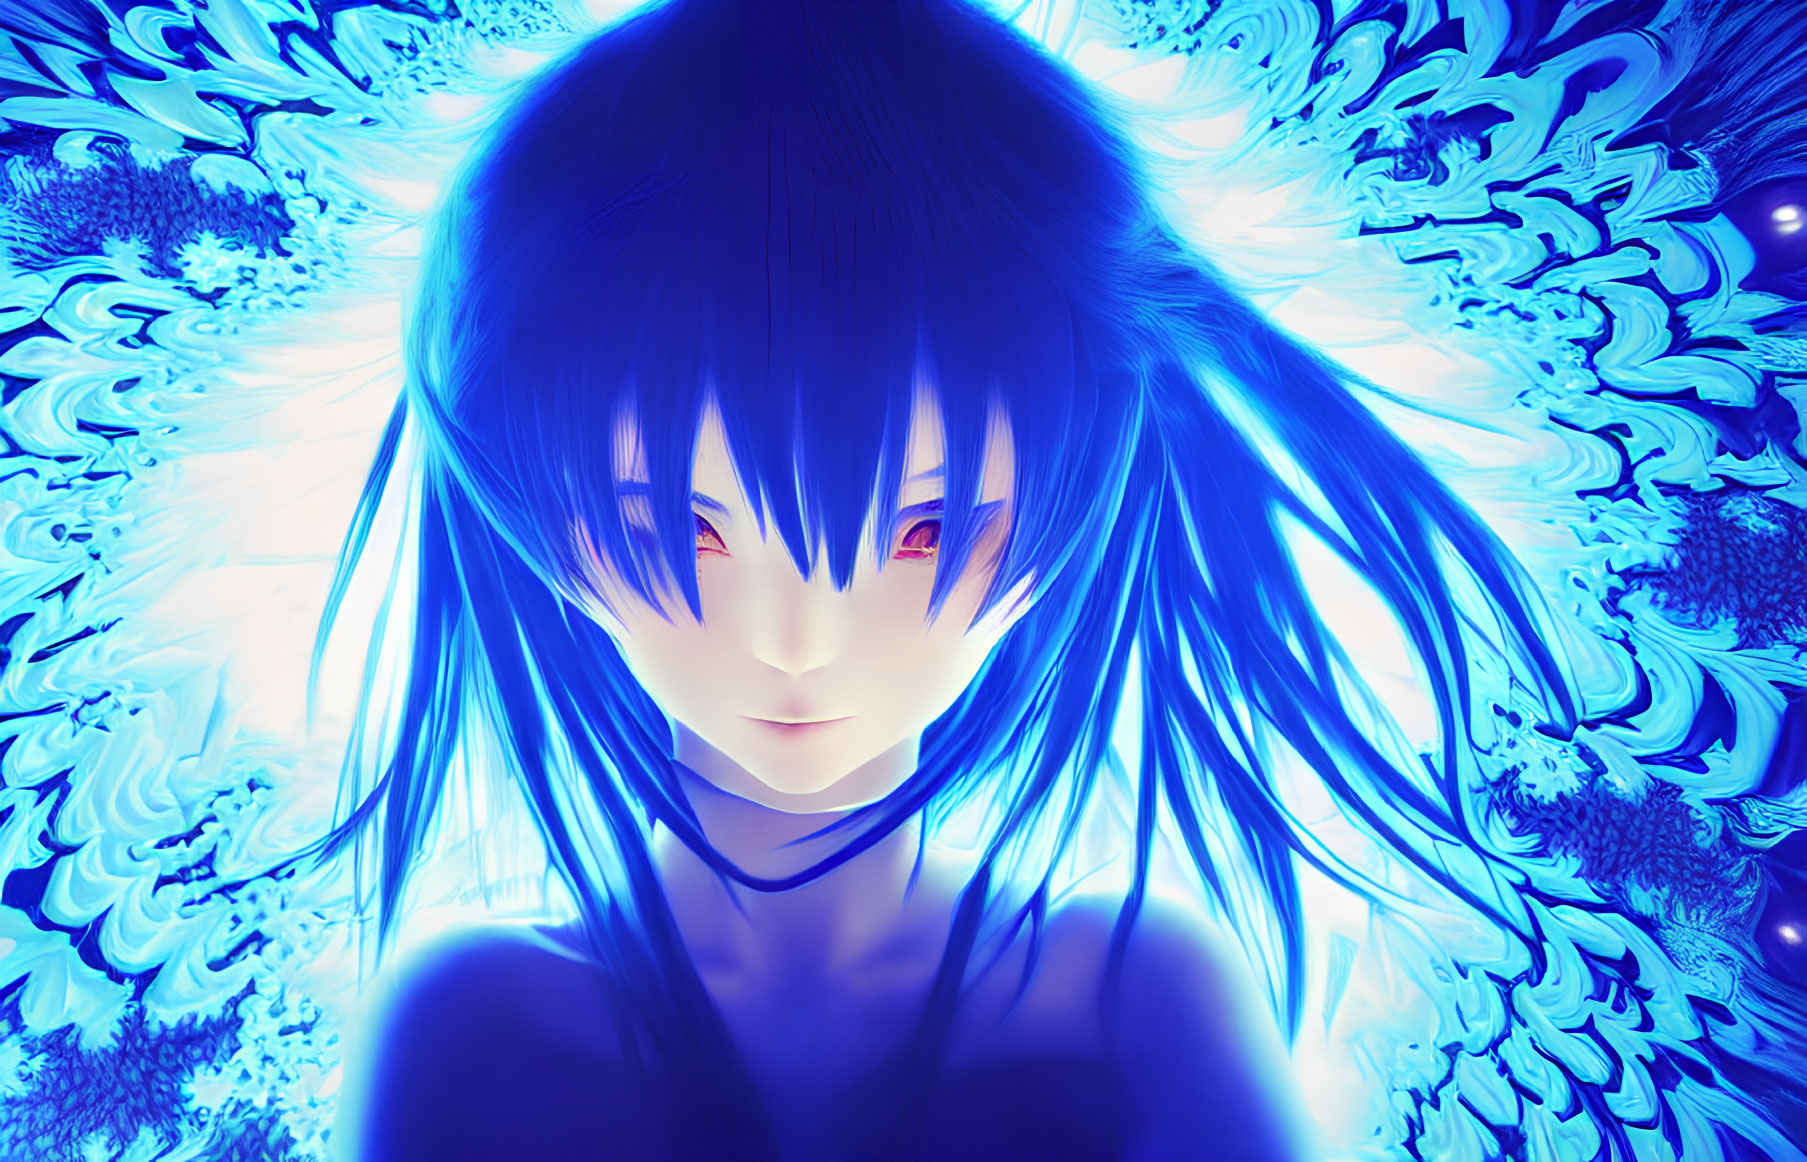 Illustration of character with blue hair and red eyes in glowing blue patterns